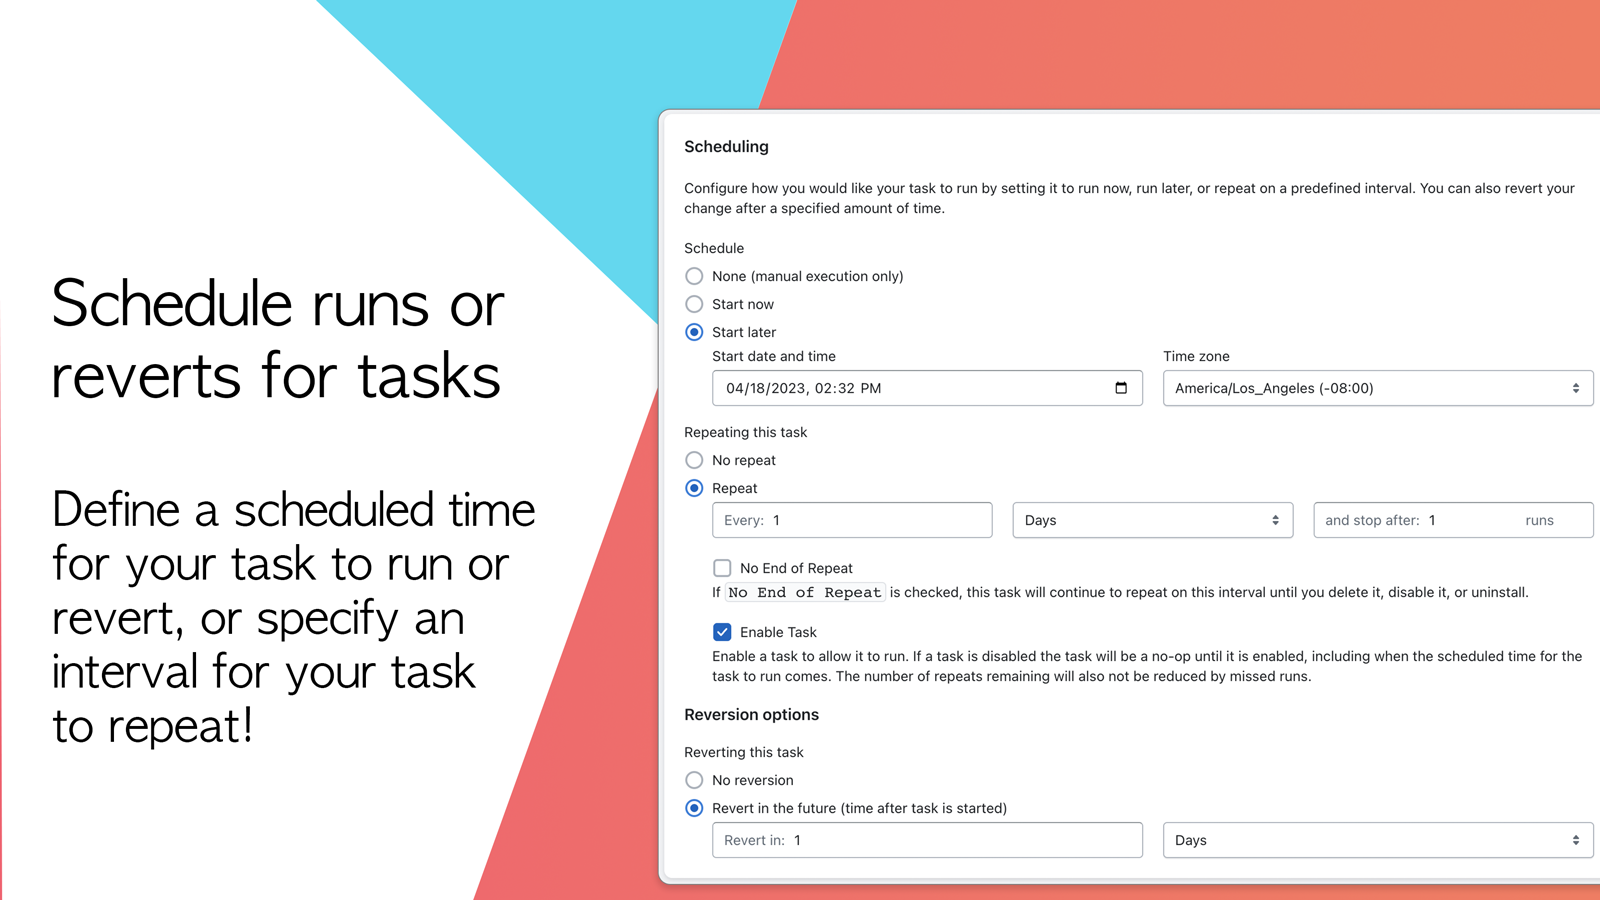 Schedule your tasks to run, revert, or repeat in the future!